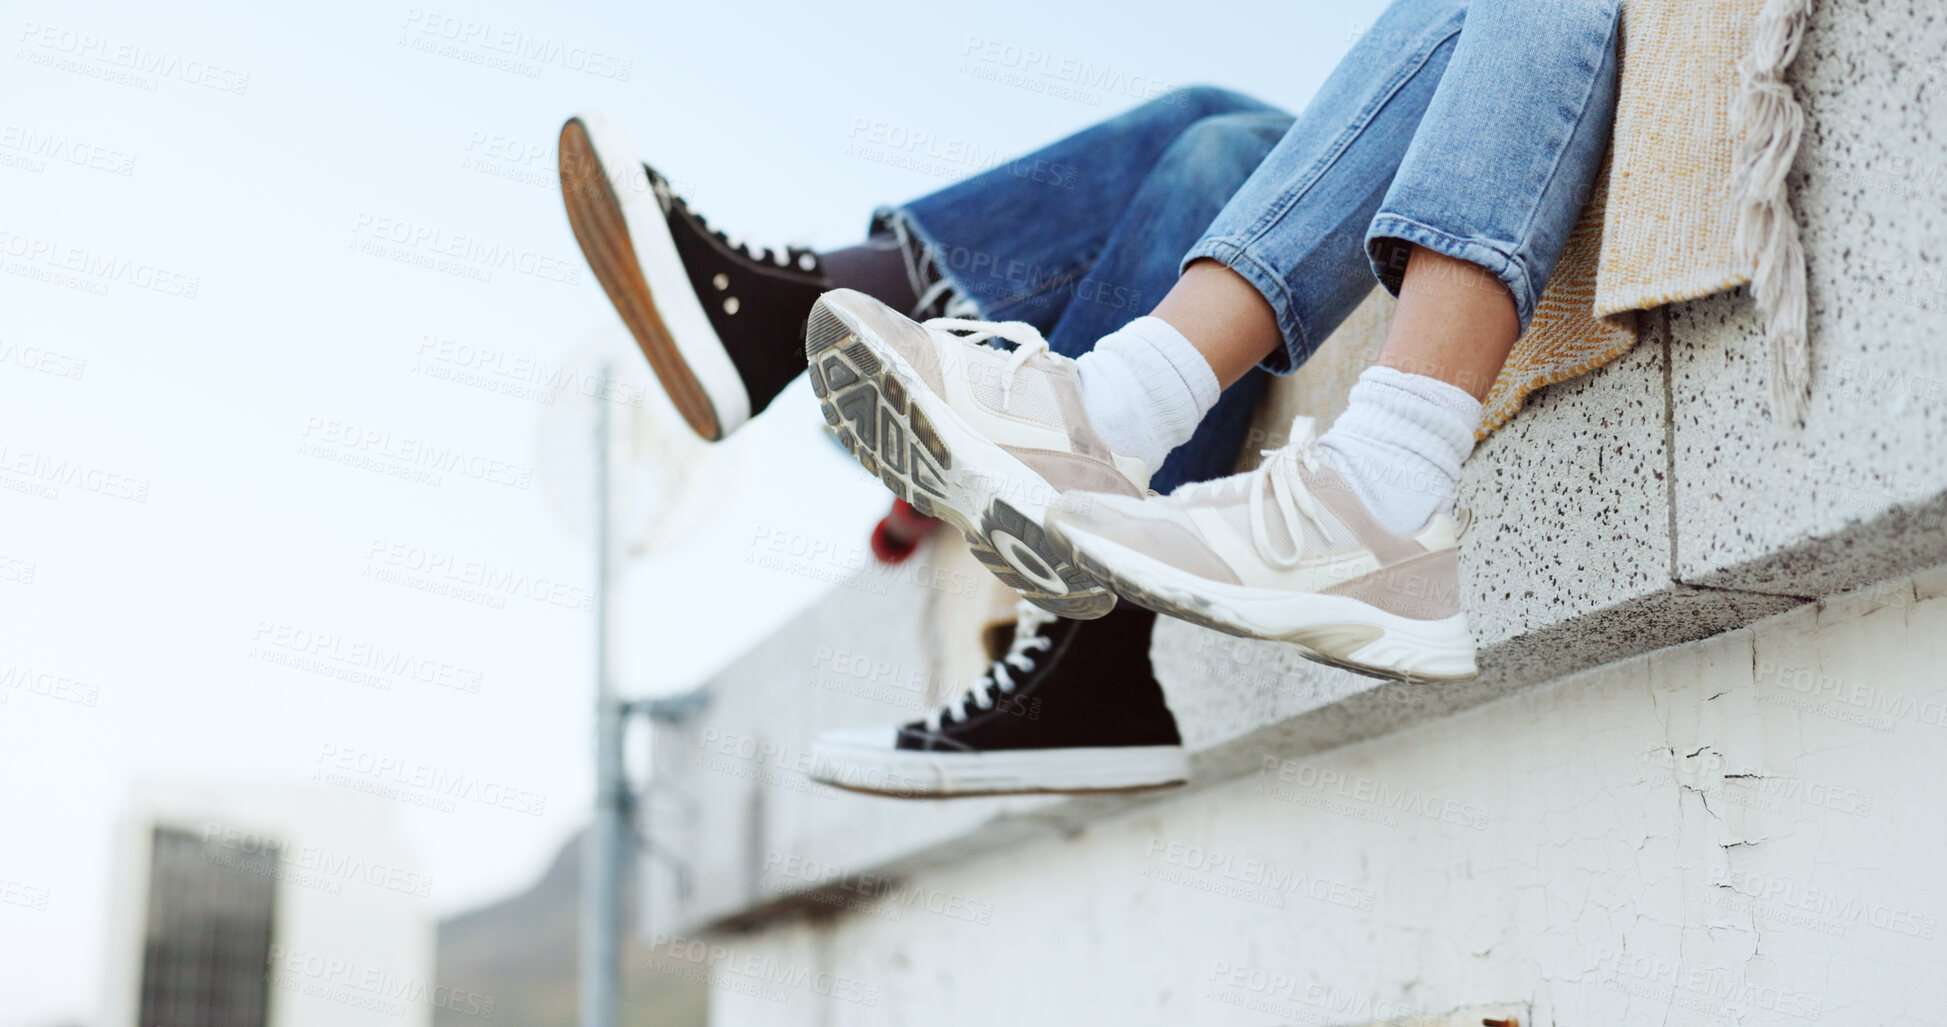 Buy stock photo Shoes, legs and couple on rooftop in the city sitting together, having fun or bonding. Fashion sneakers, roof and man and woman kick feet on building, enjoy weekend or freedom in urban town outdoor